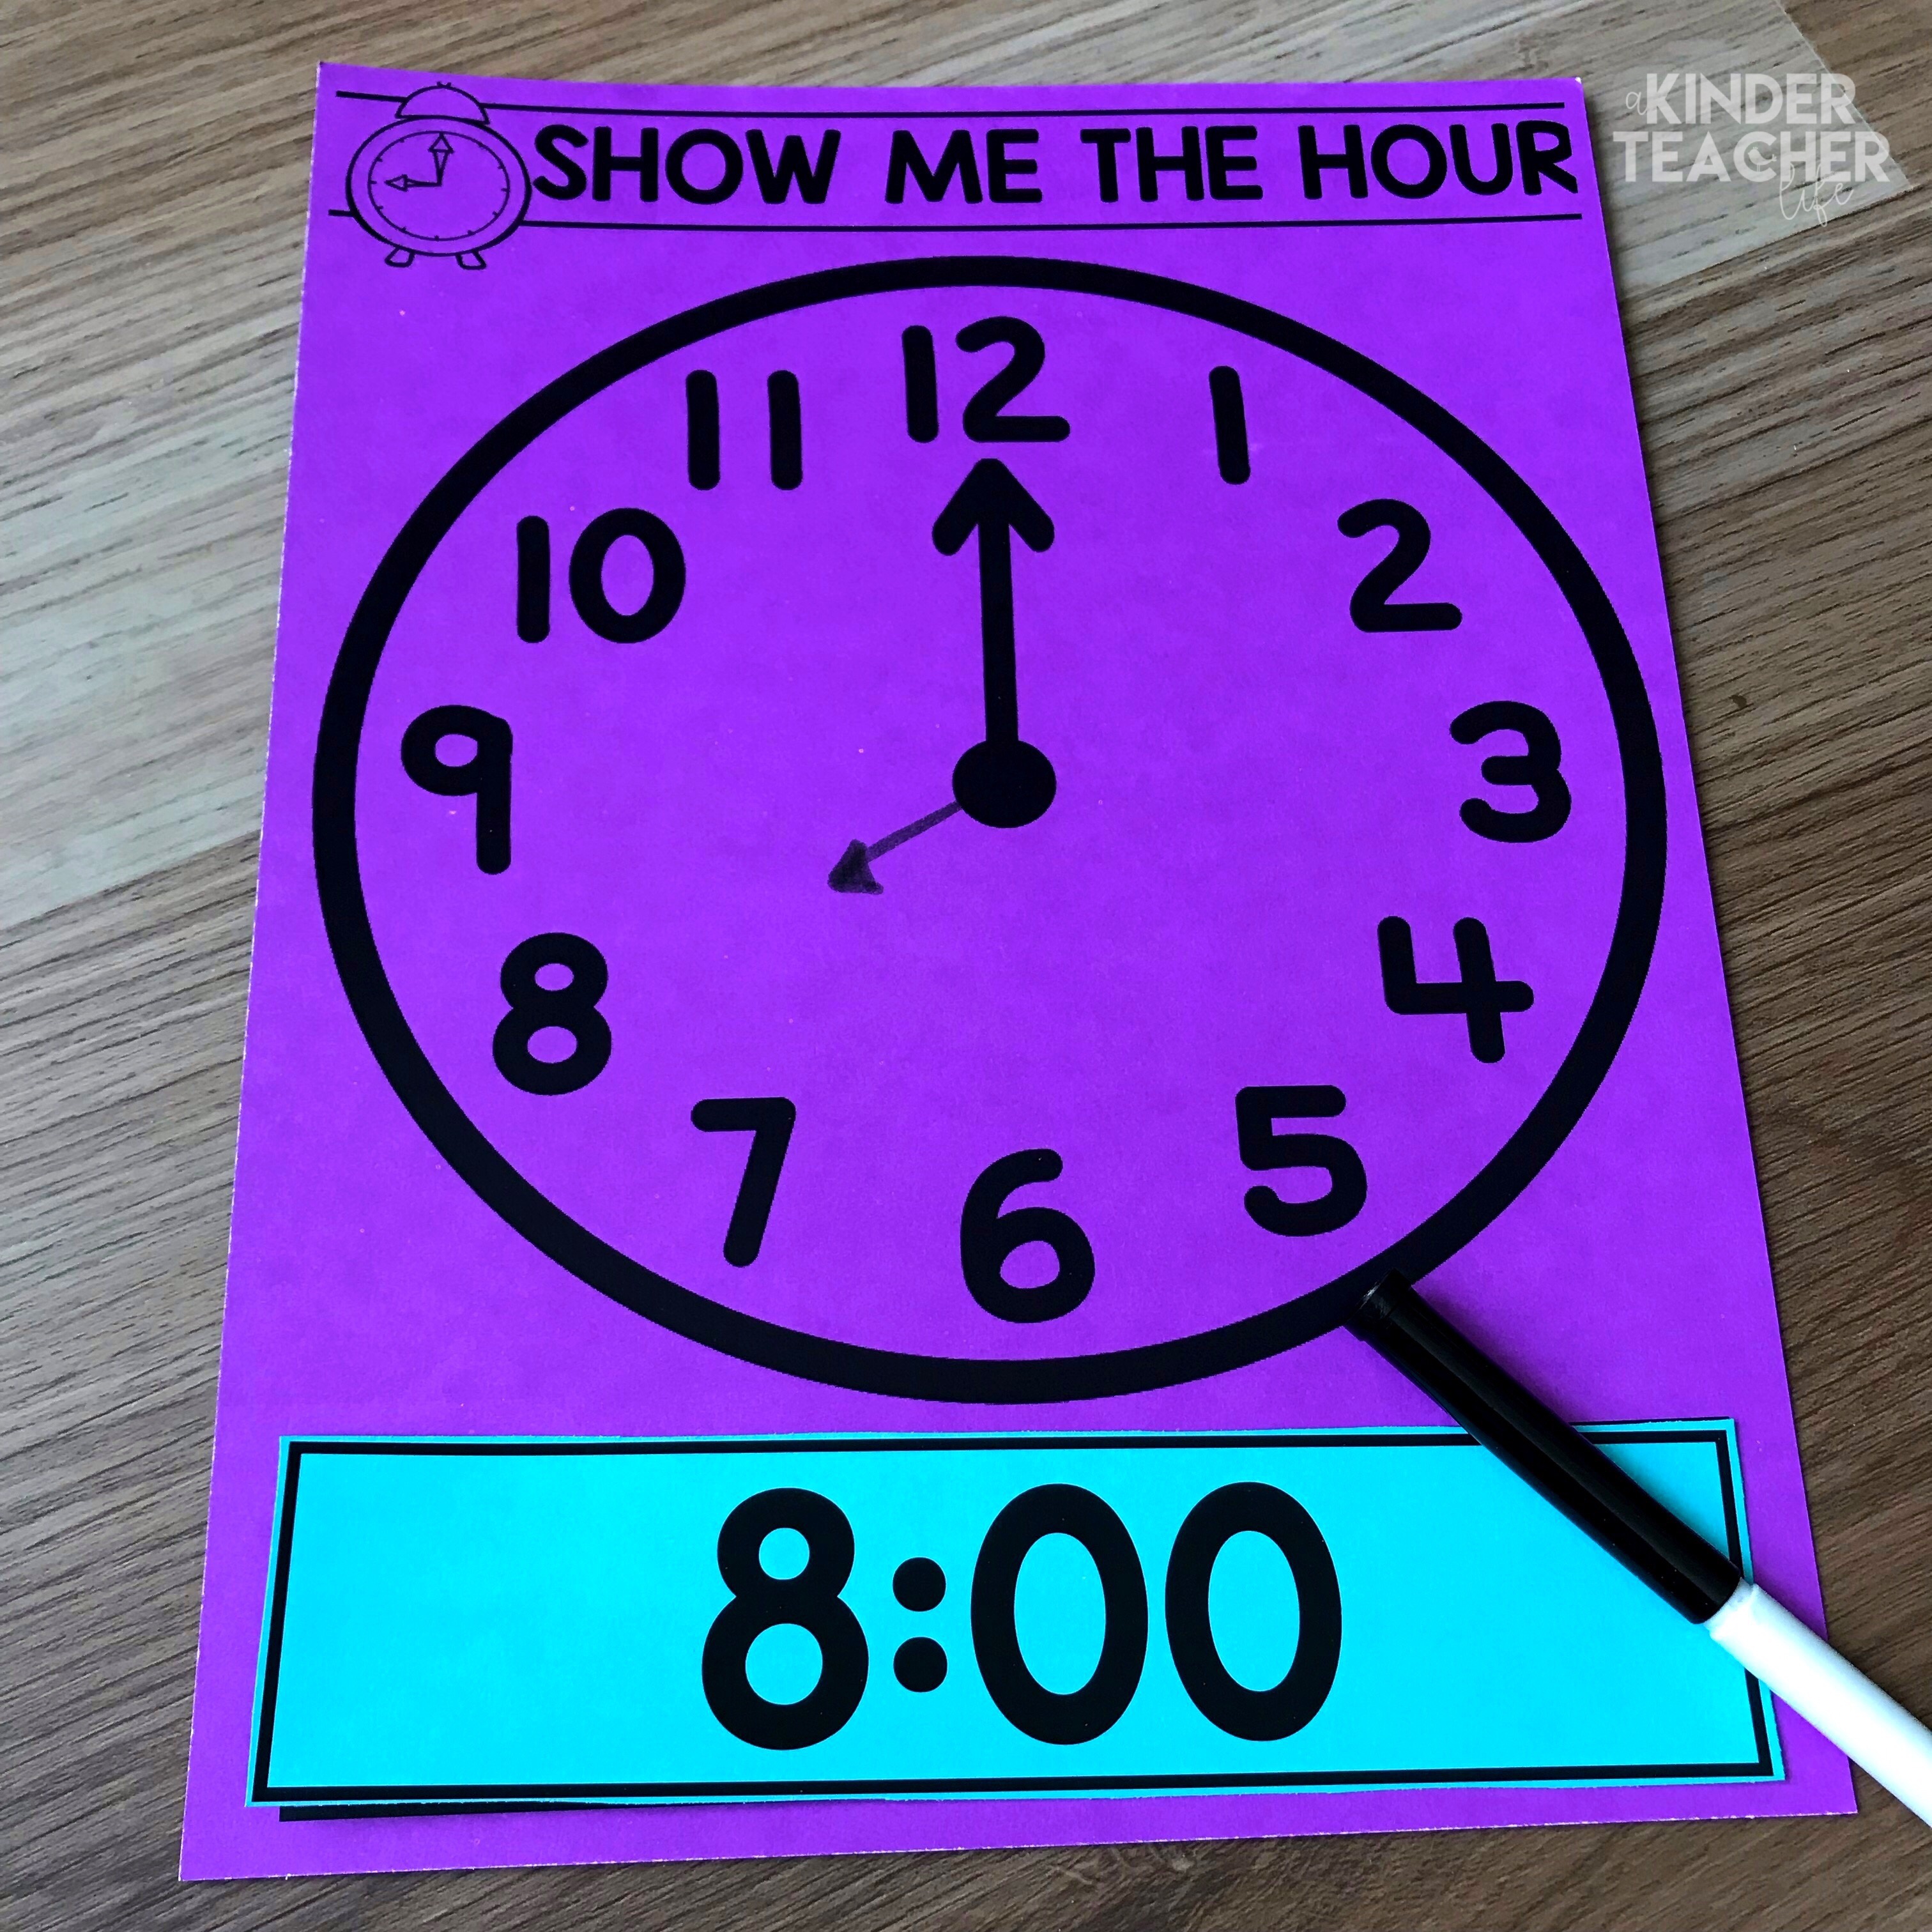 Show the Hour - Hands-on telling time math center activities for first grade students. 